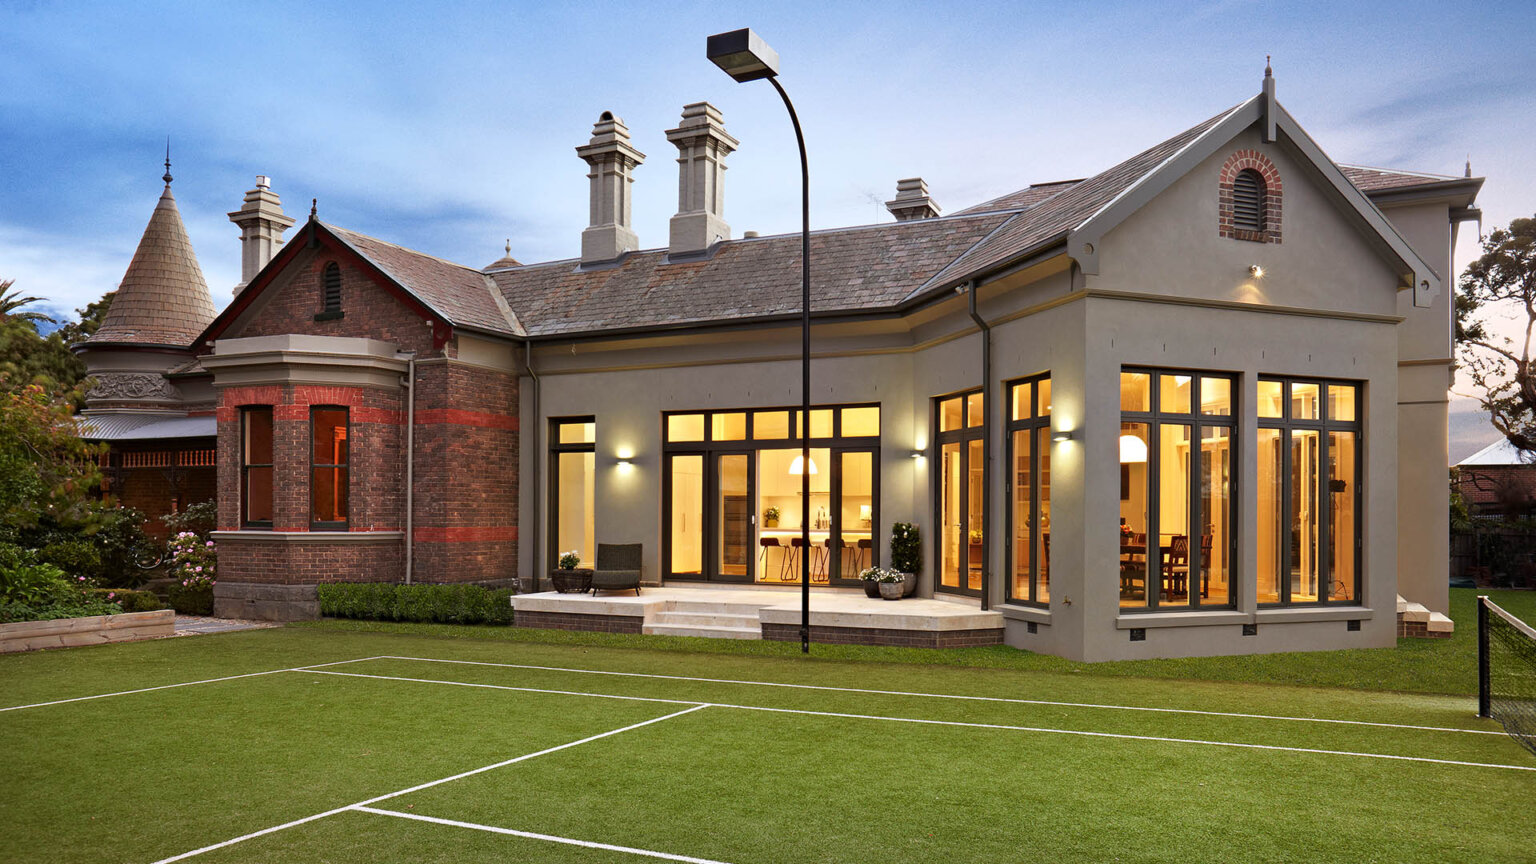 Hawthorn extension and renovations - diagonal view of tennis court and house